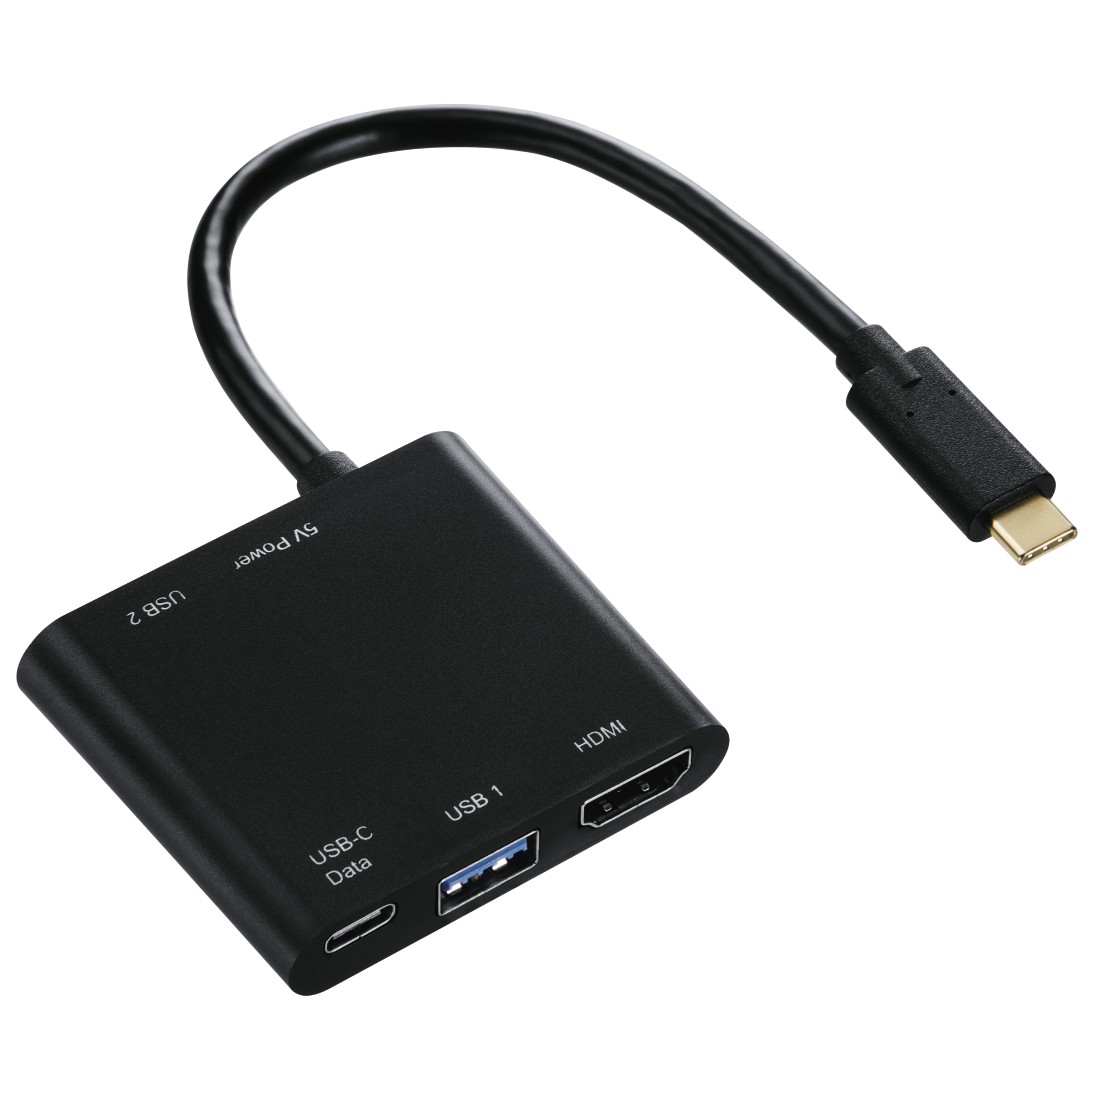 00135729 Hama 4-in-1 USB-C Multiport Adapter for 2x USB 3.1, HDMI™ and USB-C  (data) | hama.com